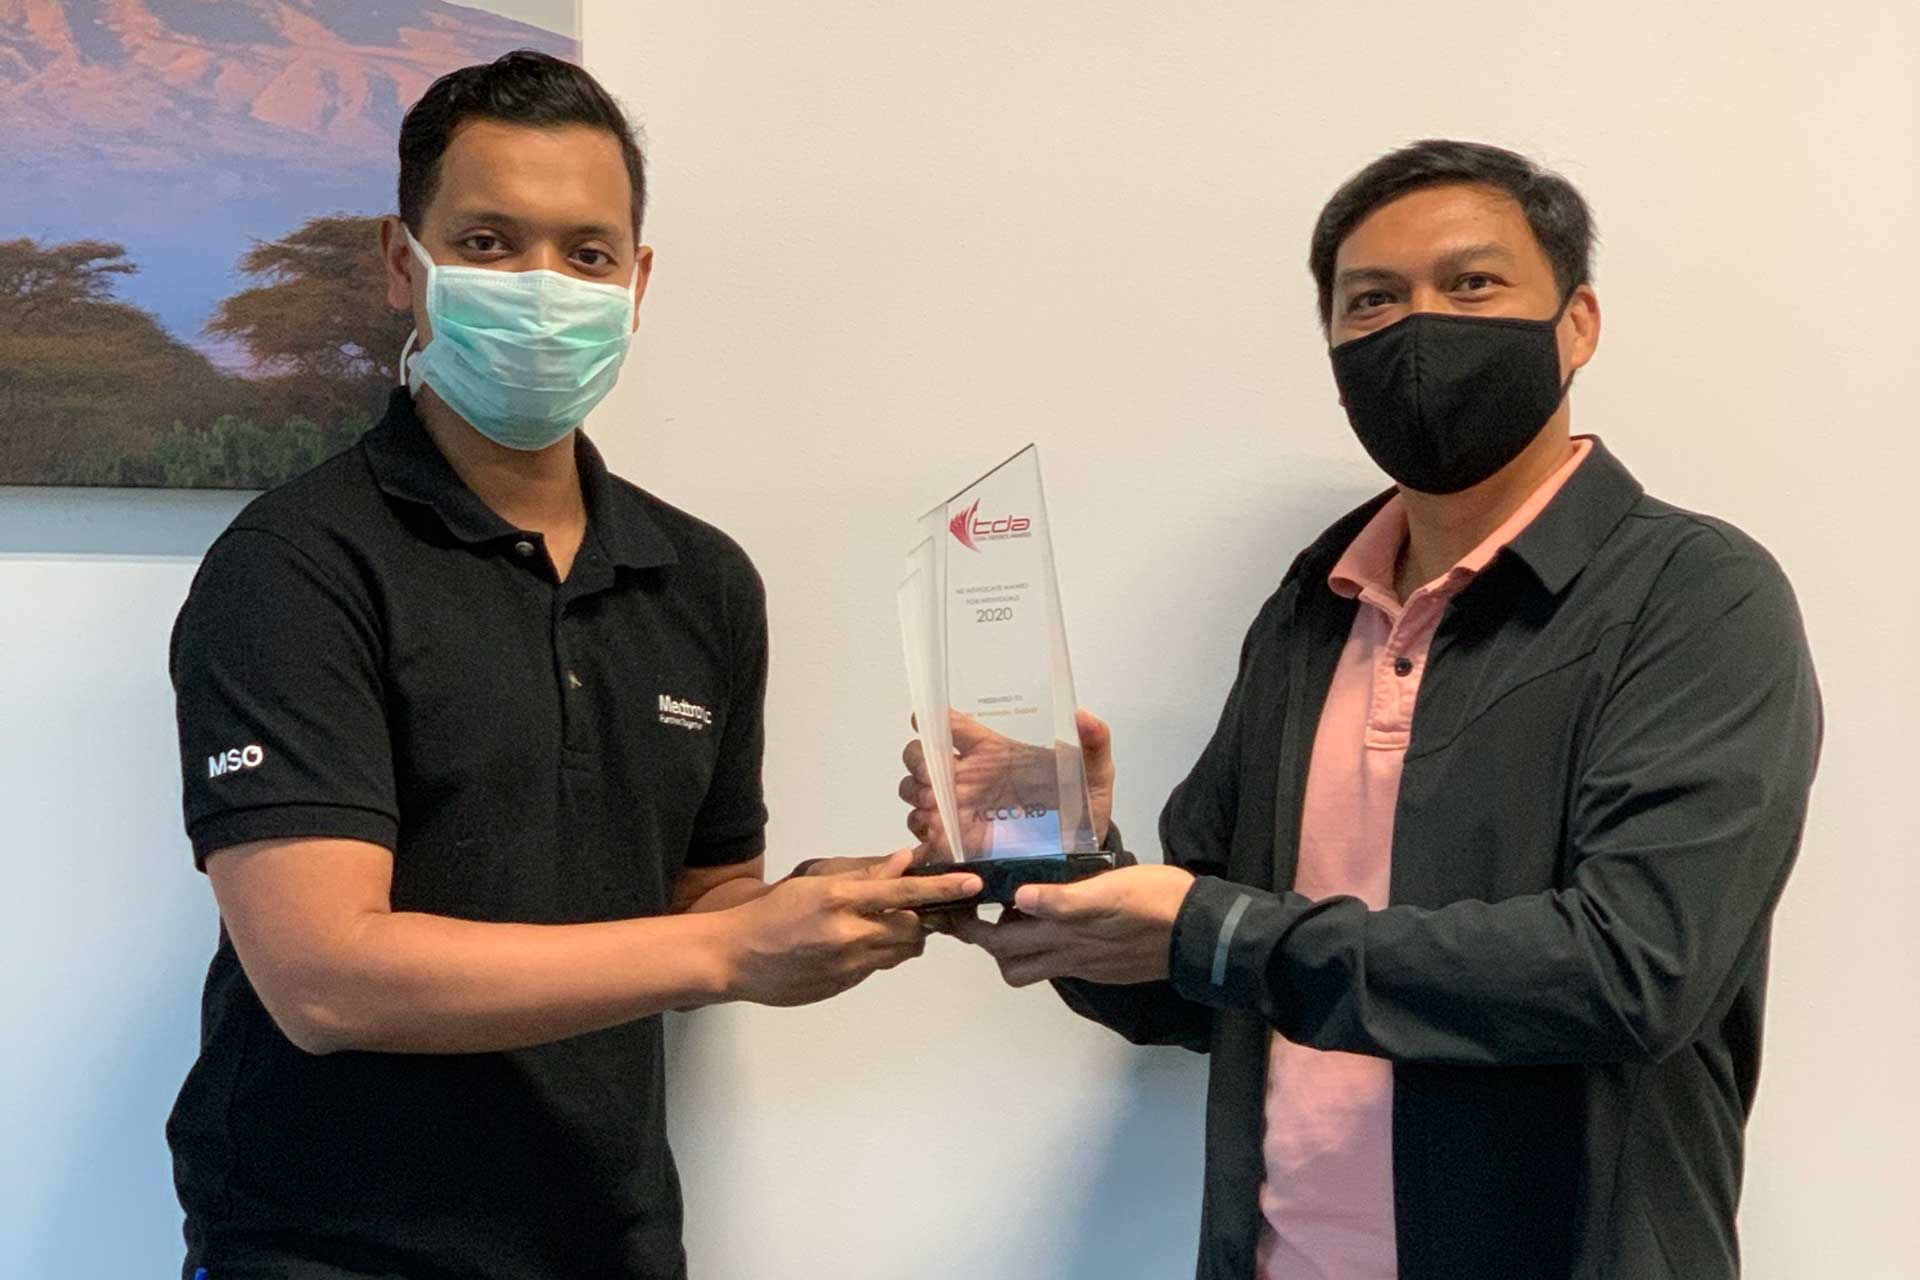 Recognition for manager who supports NS